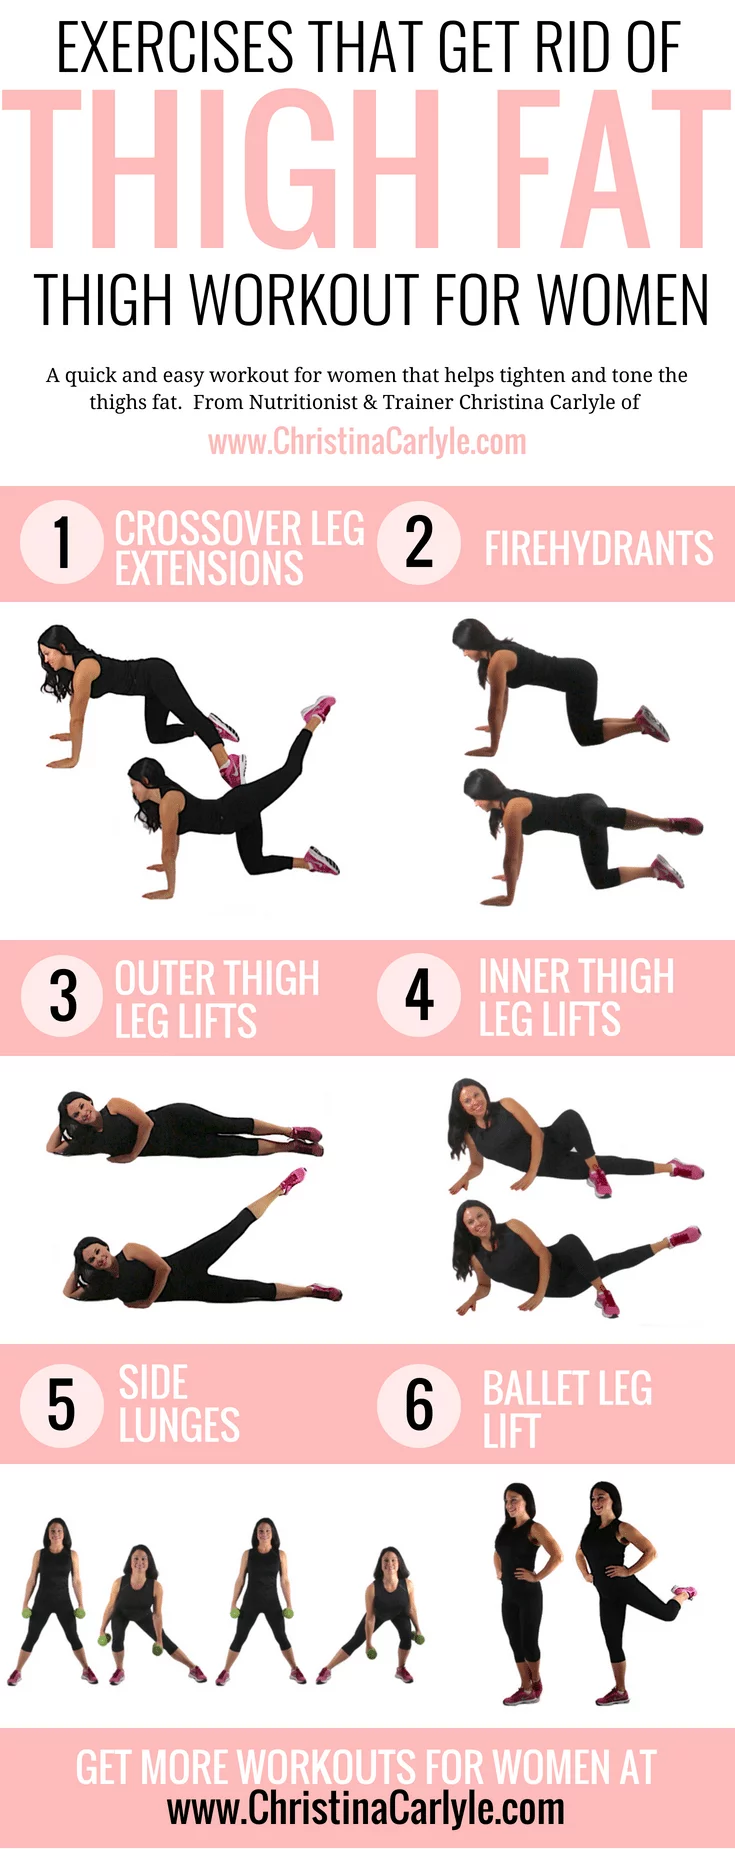 How To Get Rid Of Thigh Fat Workouts - WorkoutWalls